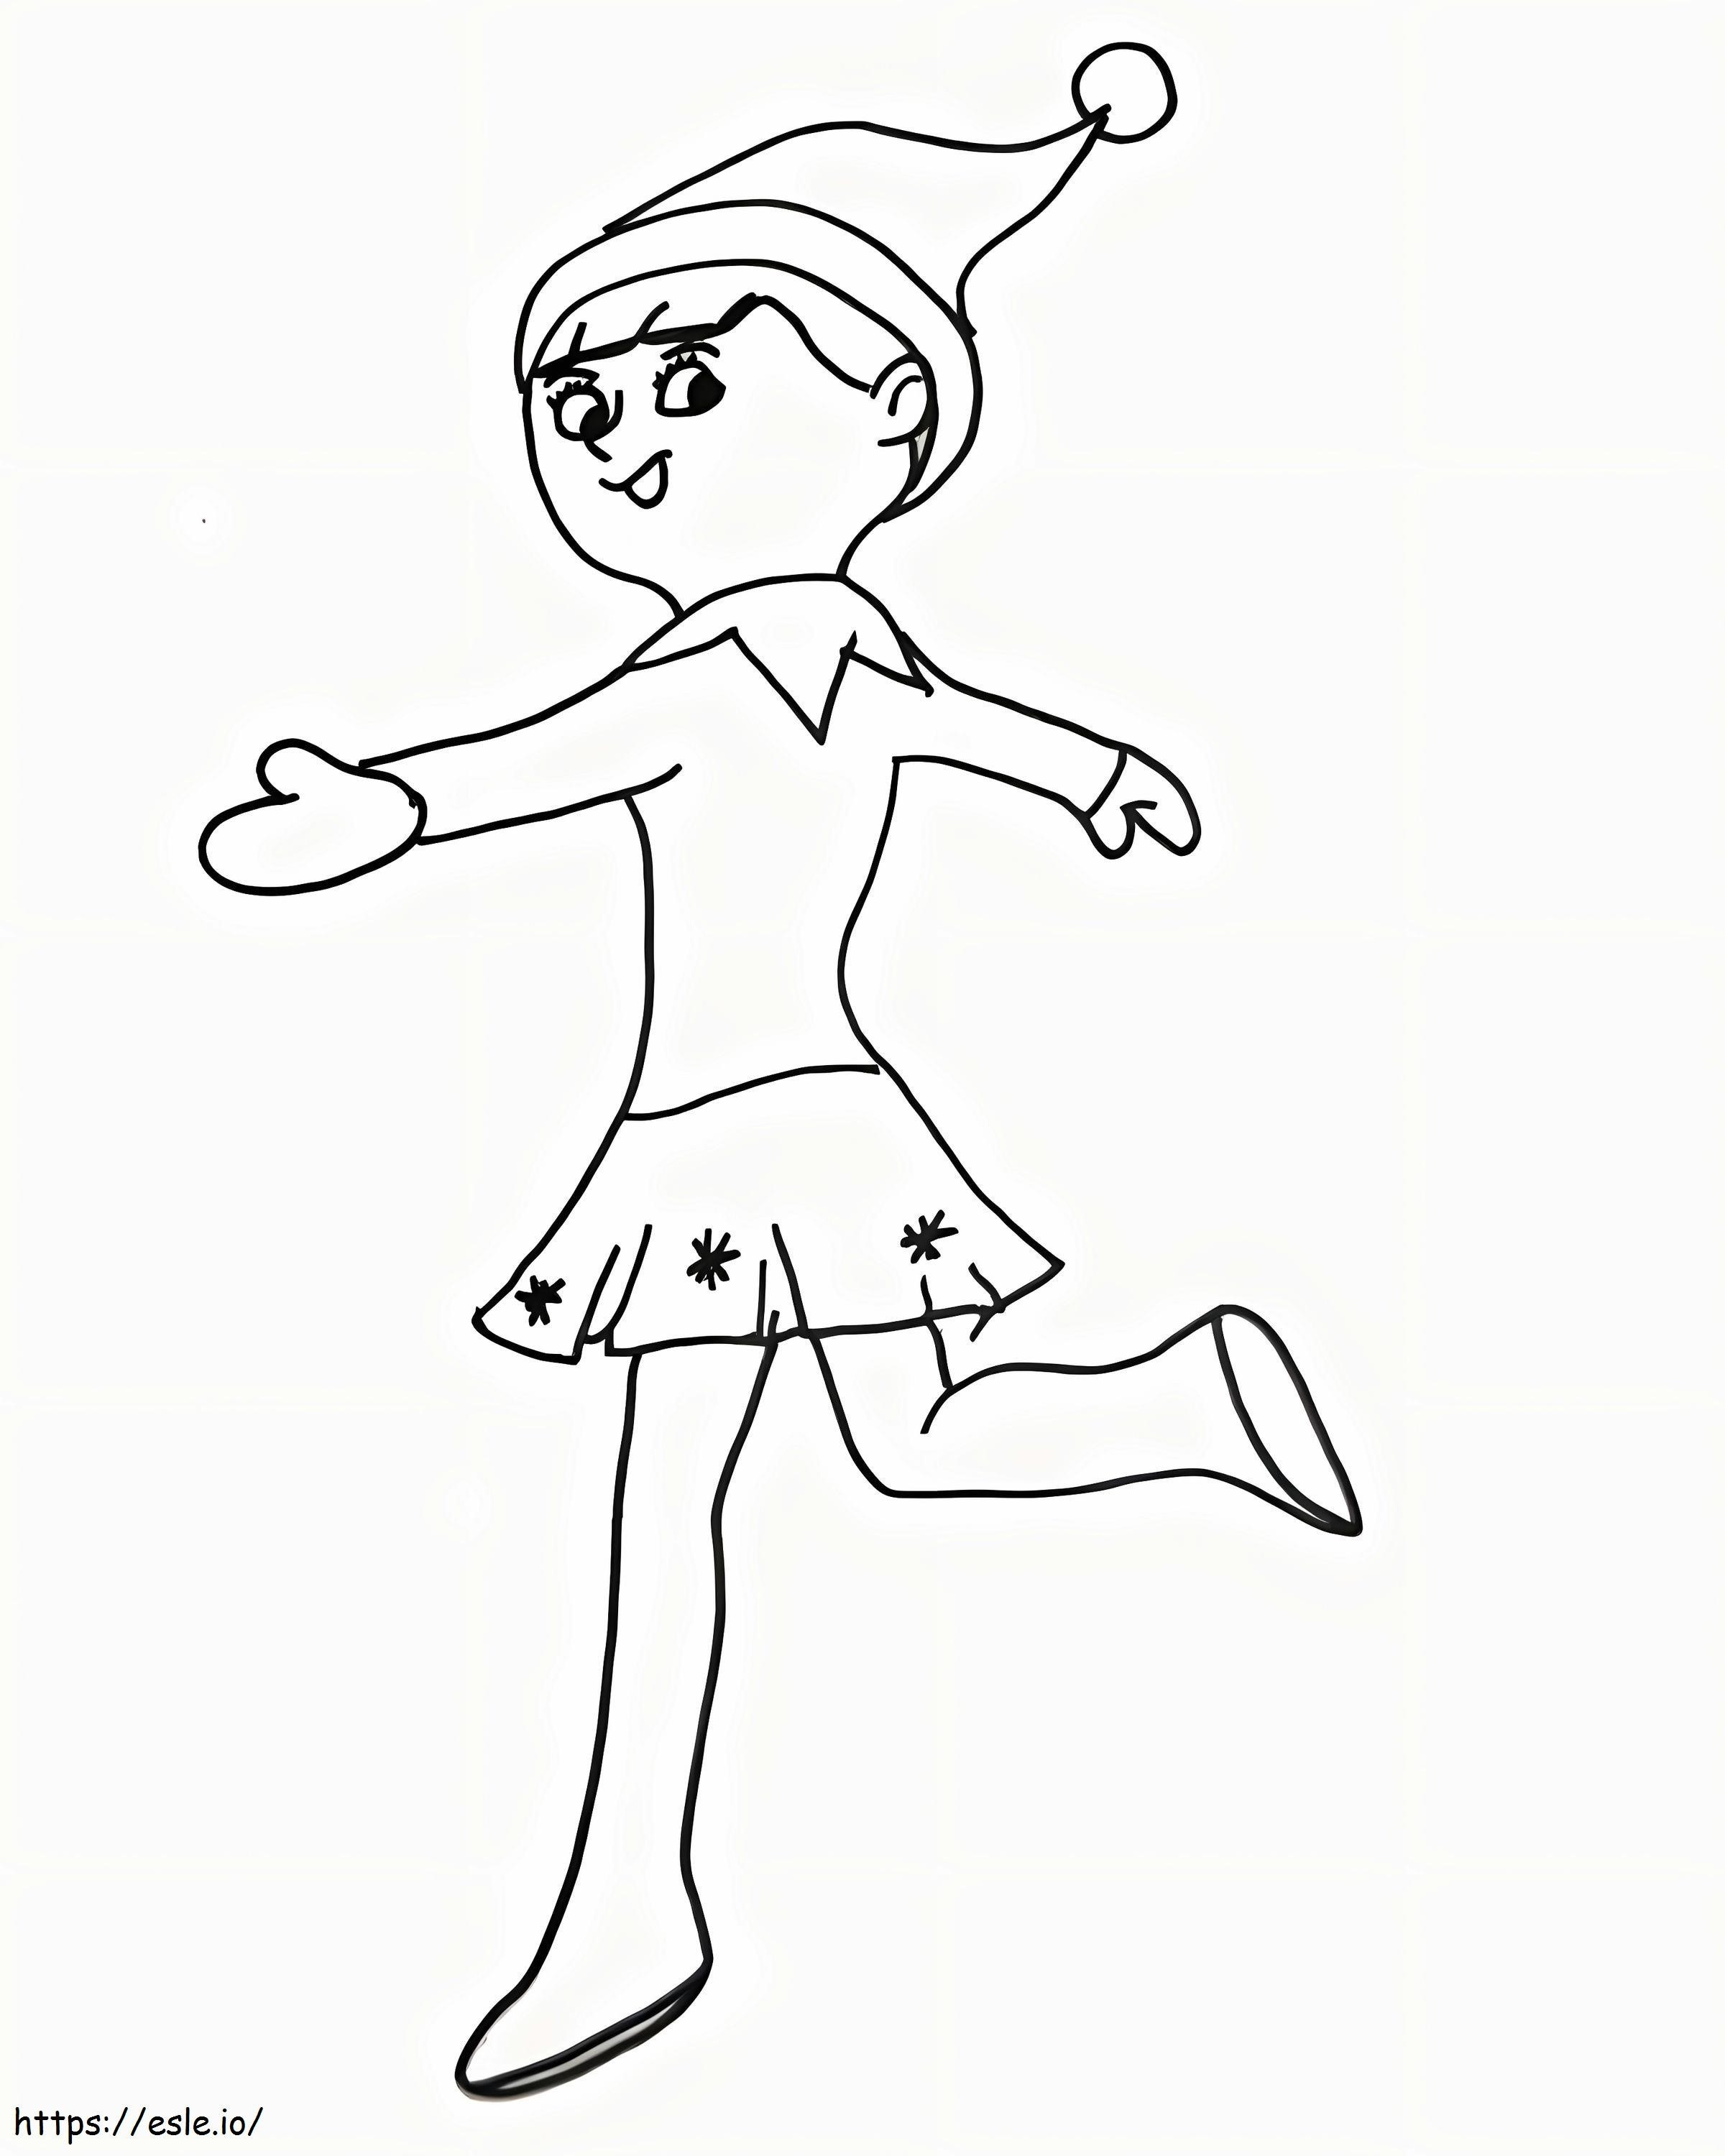 Amazing Elf On The Shelf coloring page